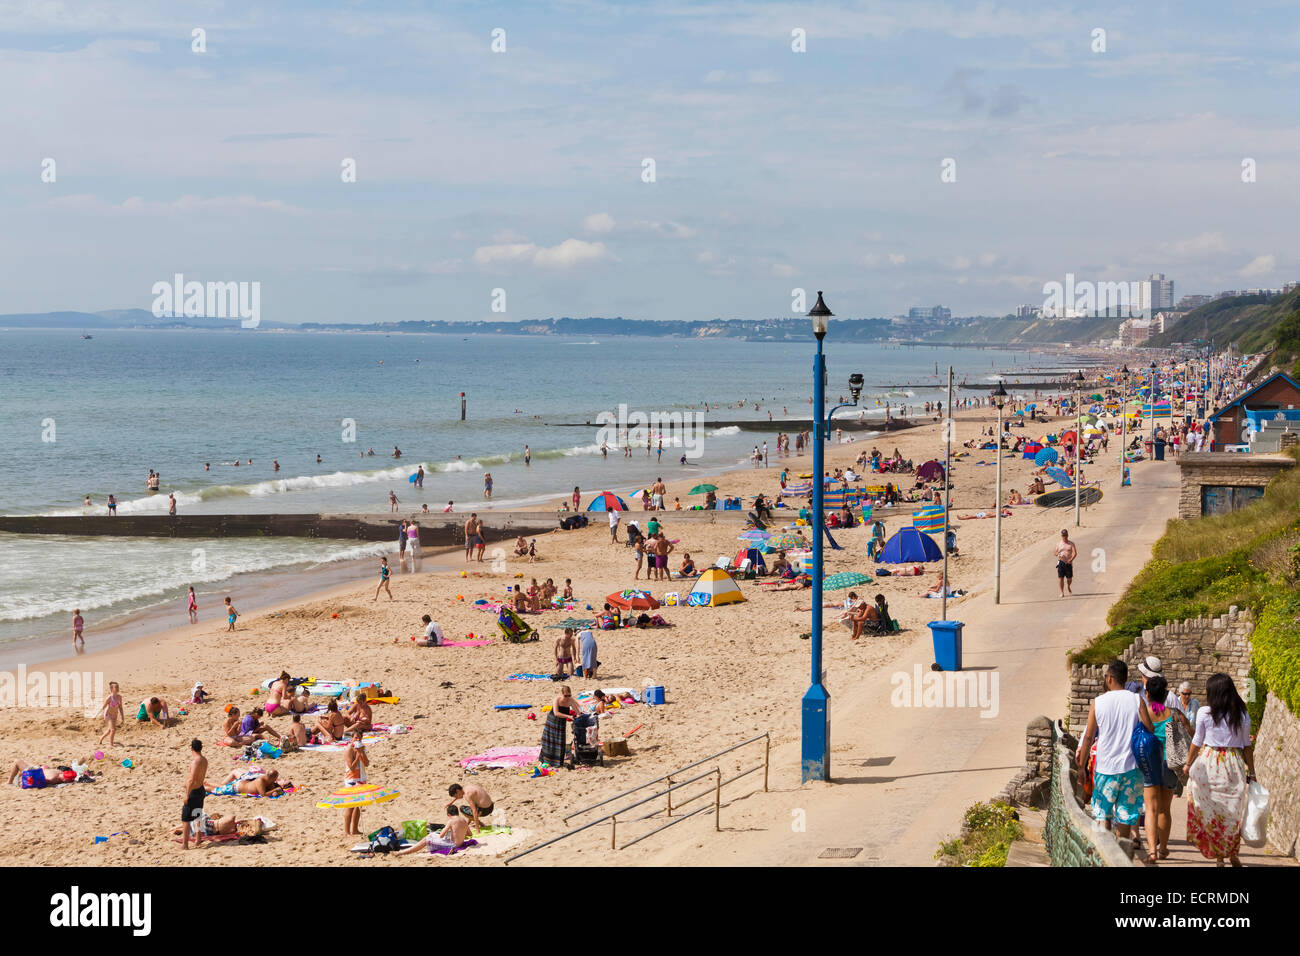 PEOPLE AT THE BEACH, BOURNEMOUTH, SEASIDE RESORT, DORSET, ENGLAND, GREAT BRITAIN Stock Photo